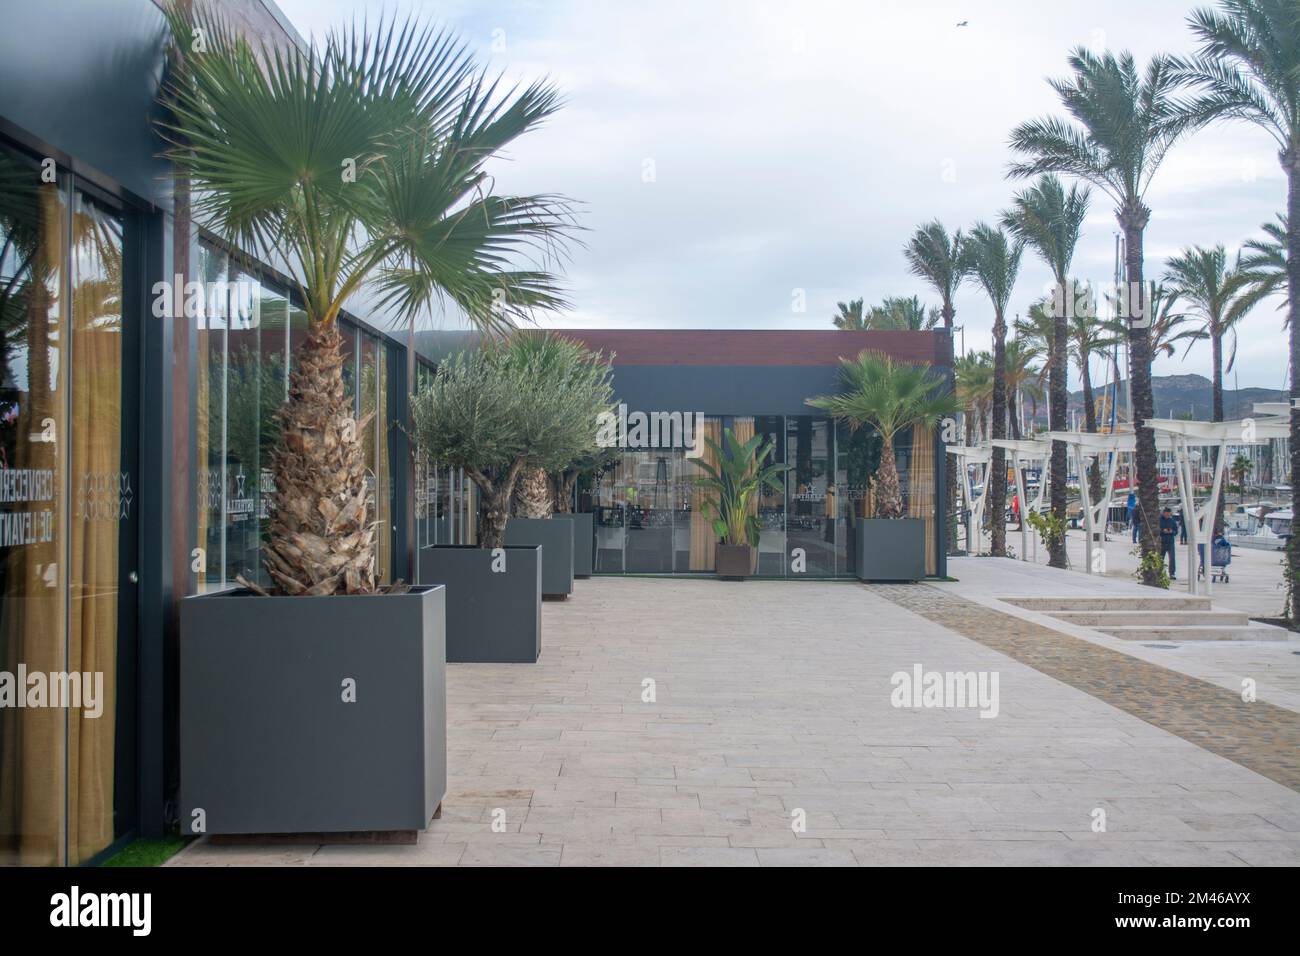 Exterior of the new Alviento bar restaurant on the quayside of the port of Cartagena in Murcia, Spain Stock Photo